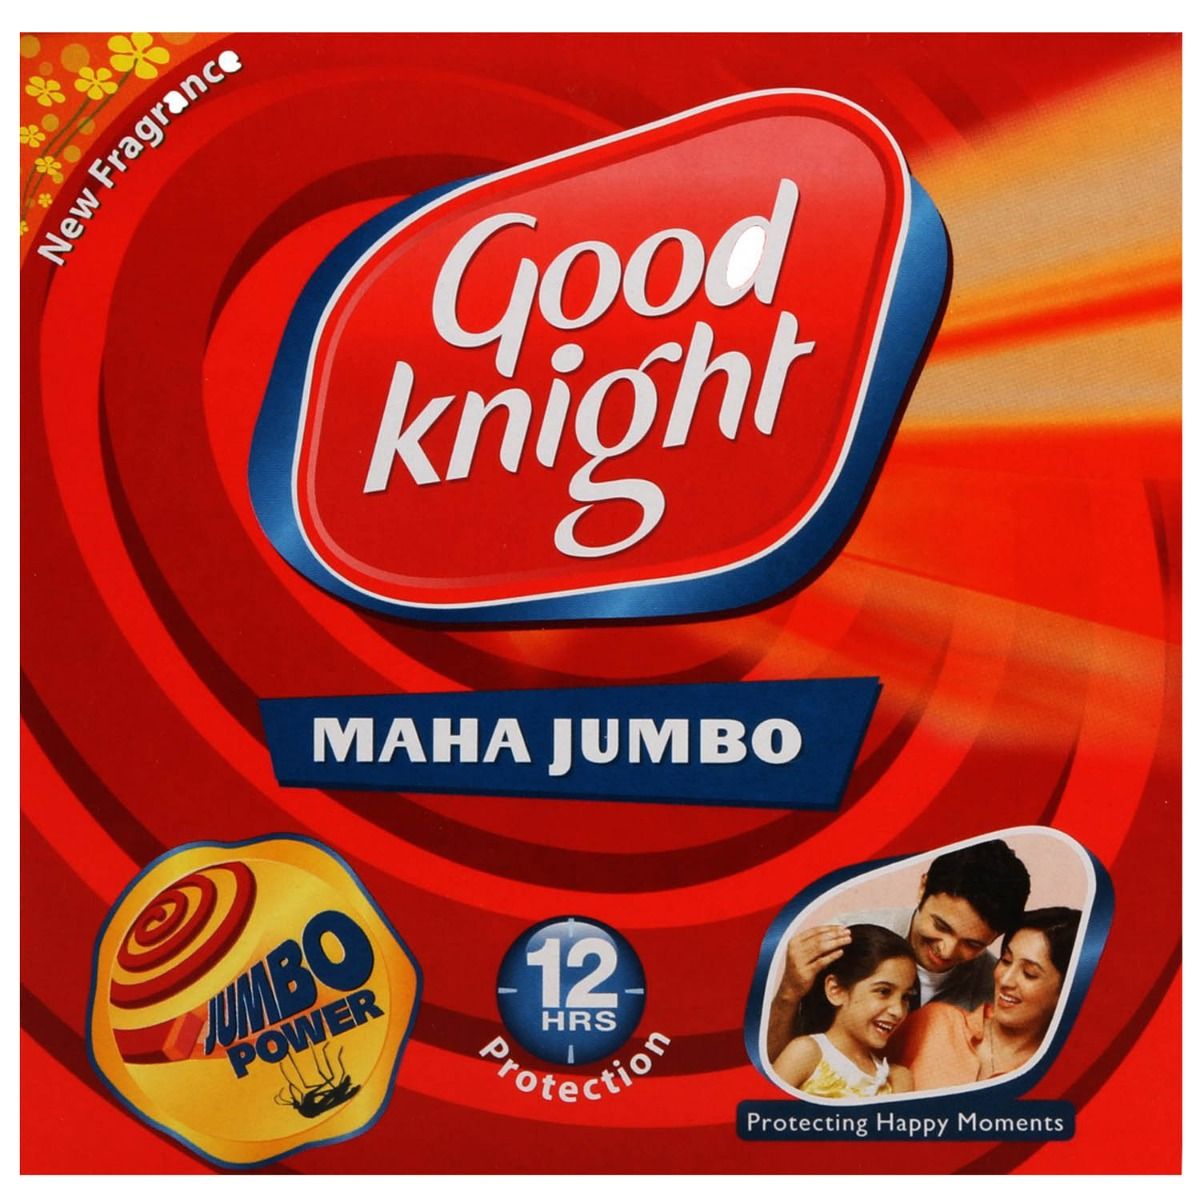 Good Knight Maha Jumbo Coil, 1 Count, Pack of 1 